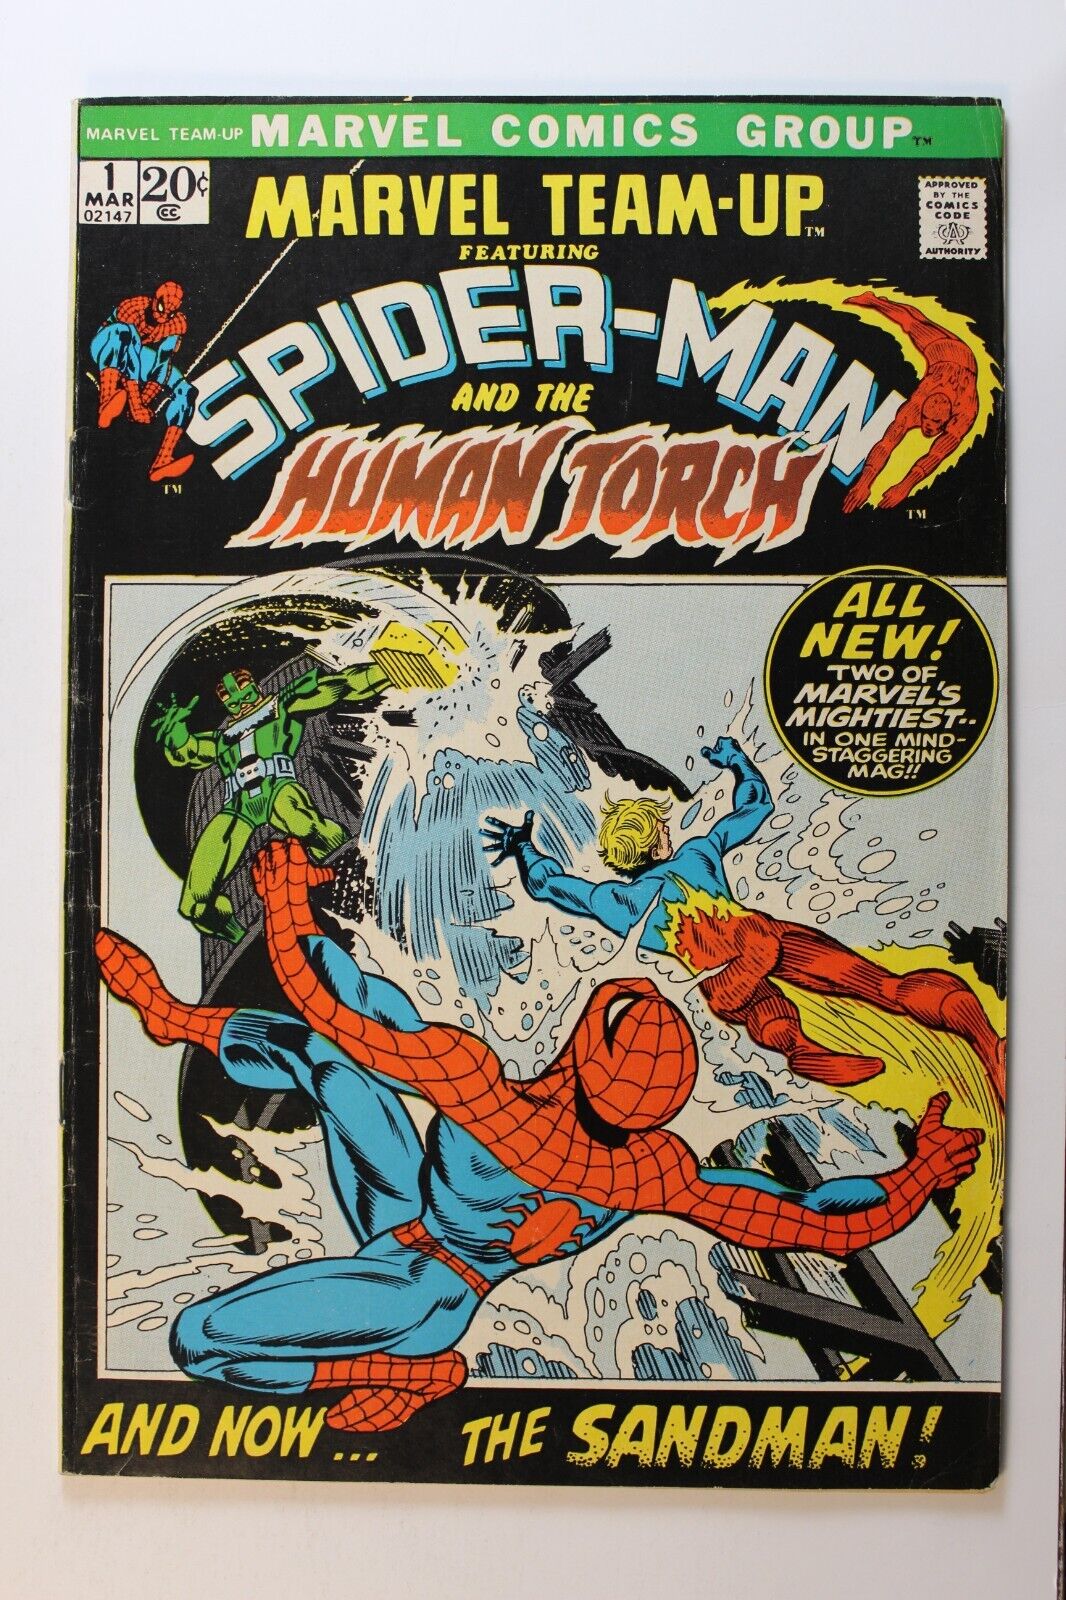 MARVEL TEAM-UP #1 Featuring SPIDER-MAN and The HUMAN TORCH and Now, The SANDMAN